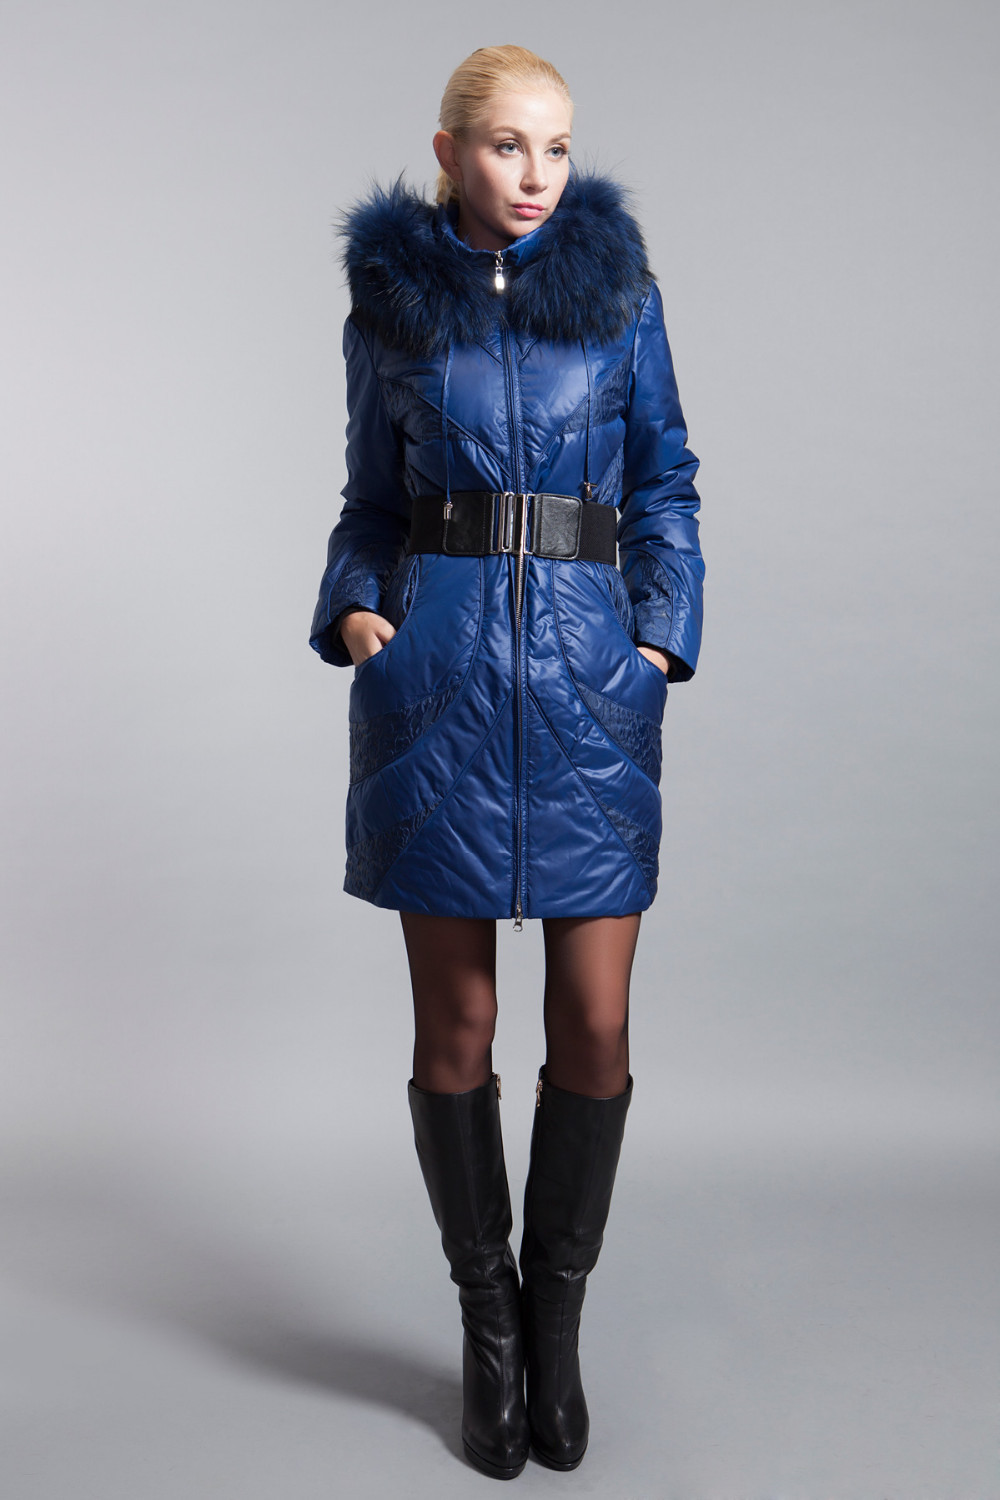 BASIC-EDITIONS-Winter-Extra-Large-Fur-Collar-Down-Coat-White-Duck-Feather-Women39s-Down-Jacket-ZY120-32242655998